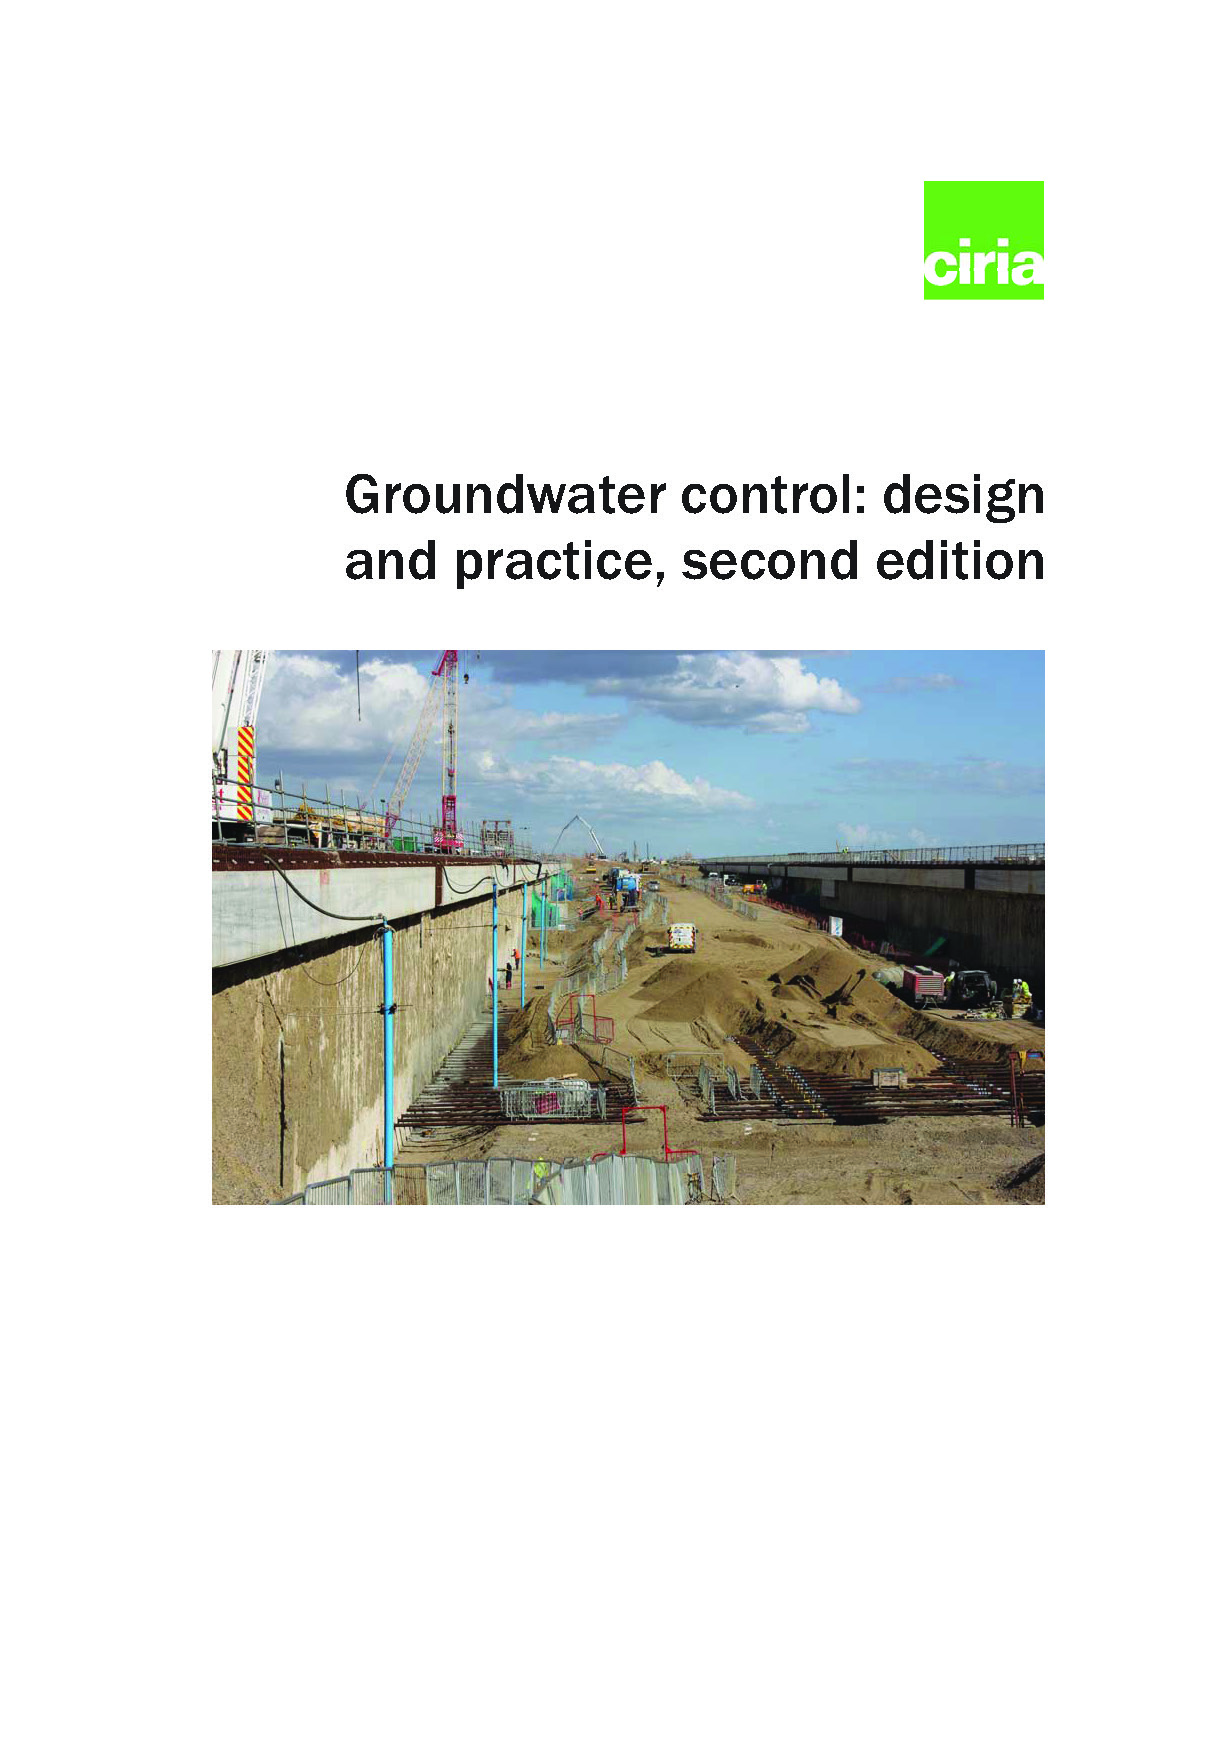 Groundwater control: design and practice, second edition